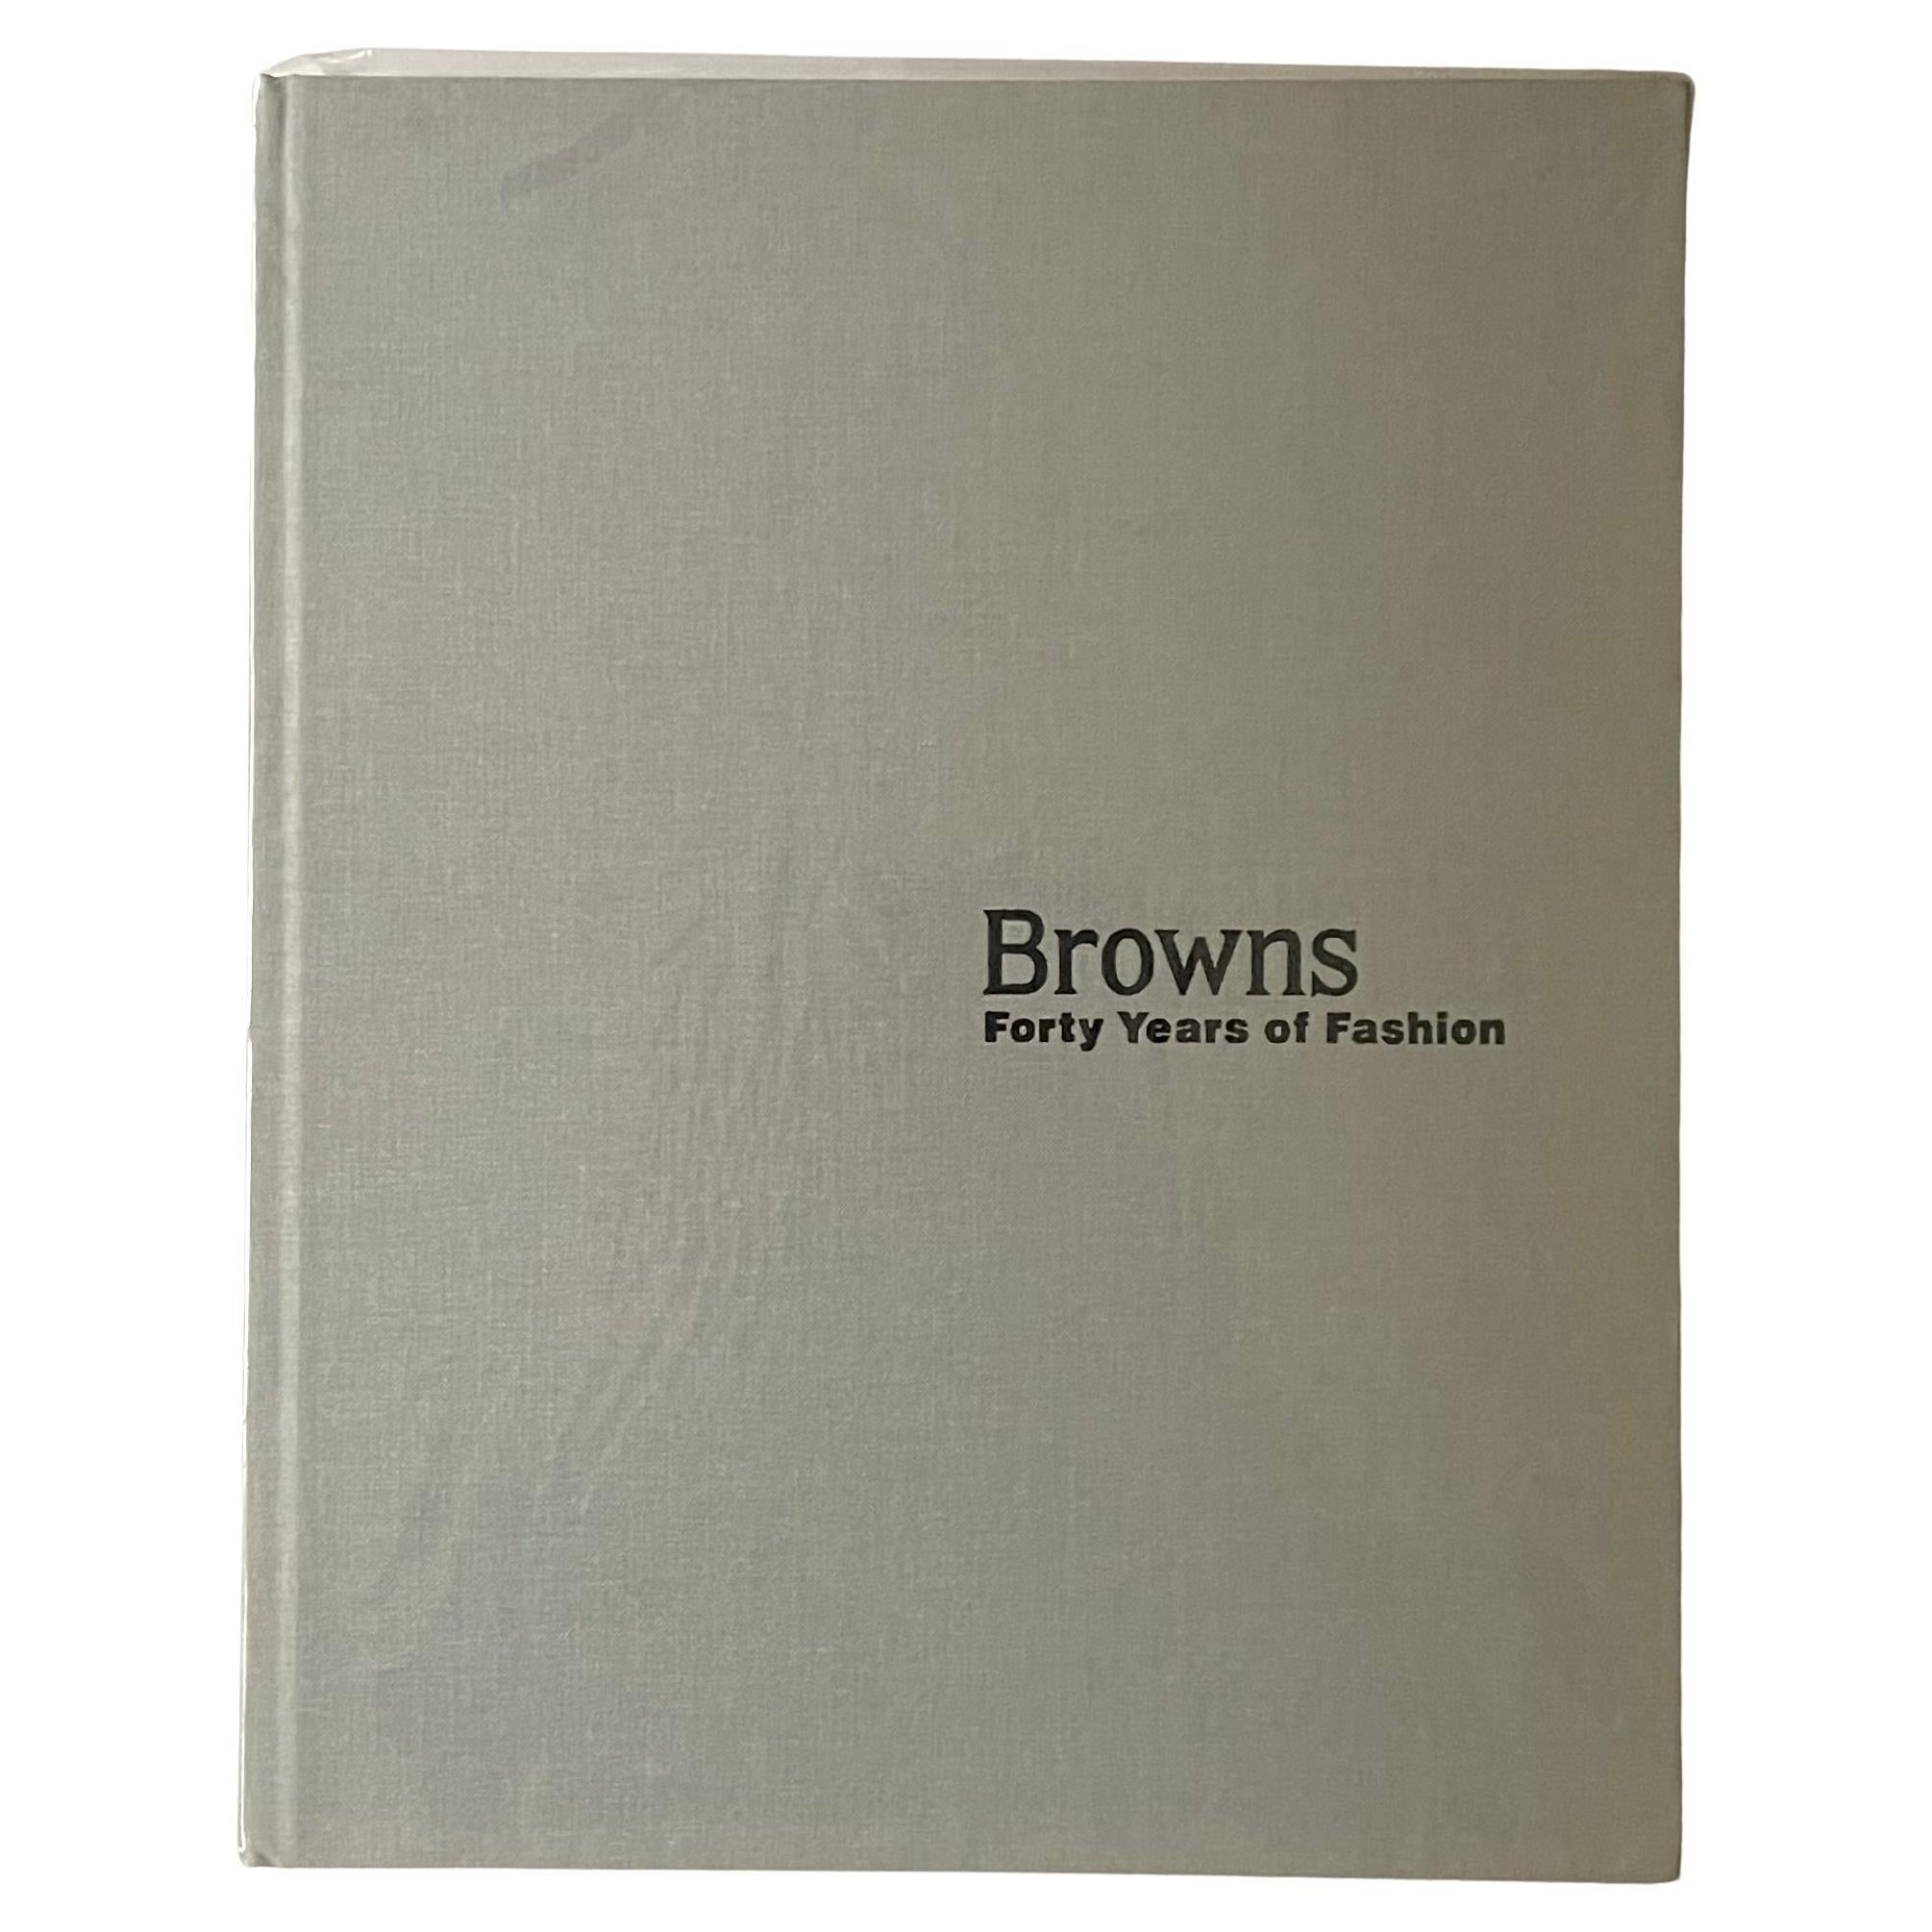 Browns: Forty Years of Fashion - 1st edition, London, 2010 For Sale